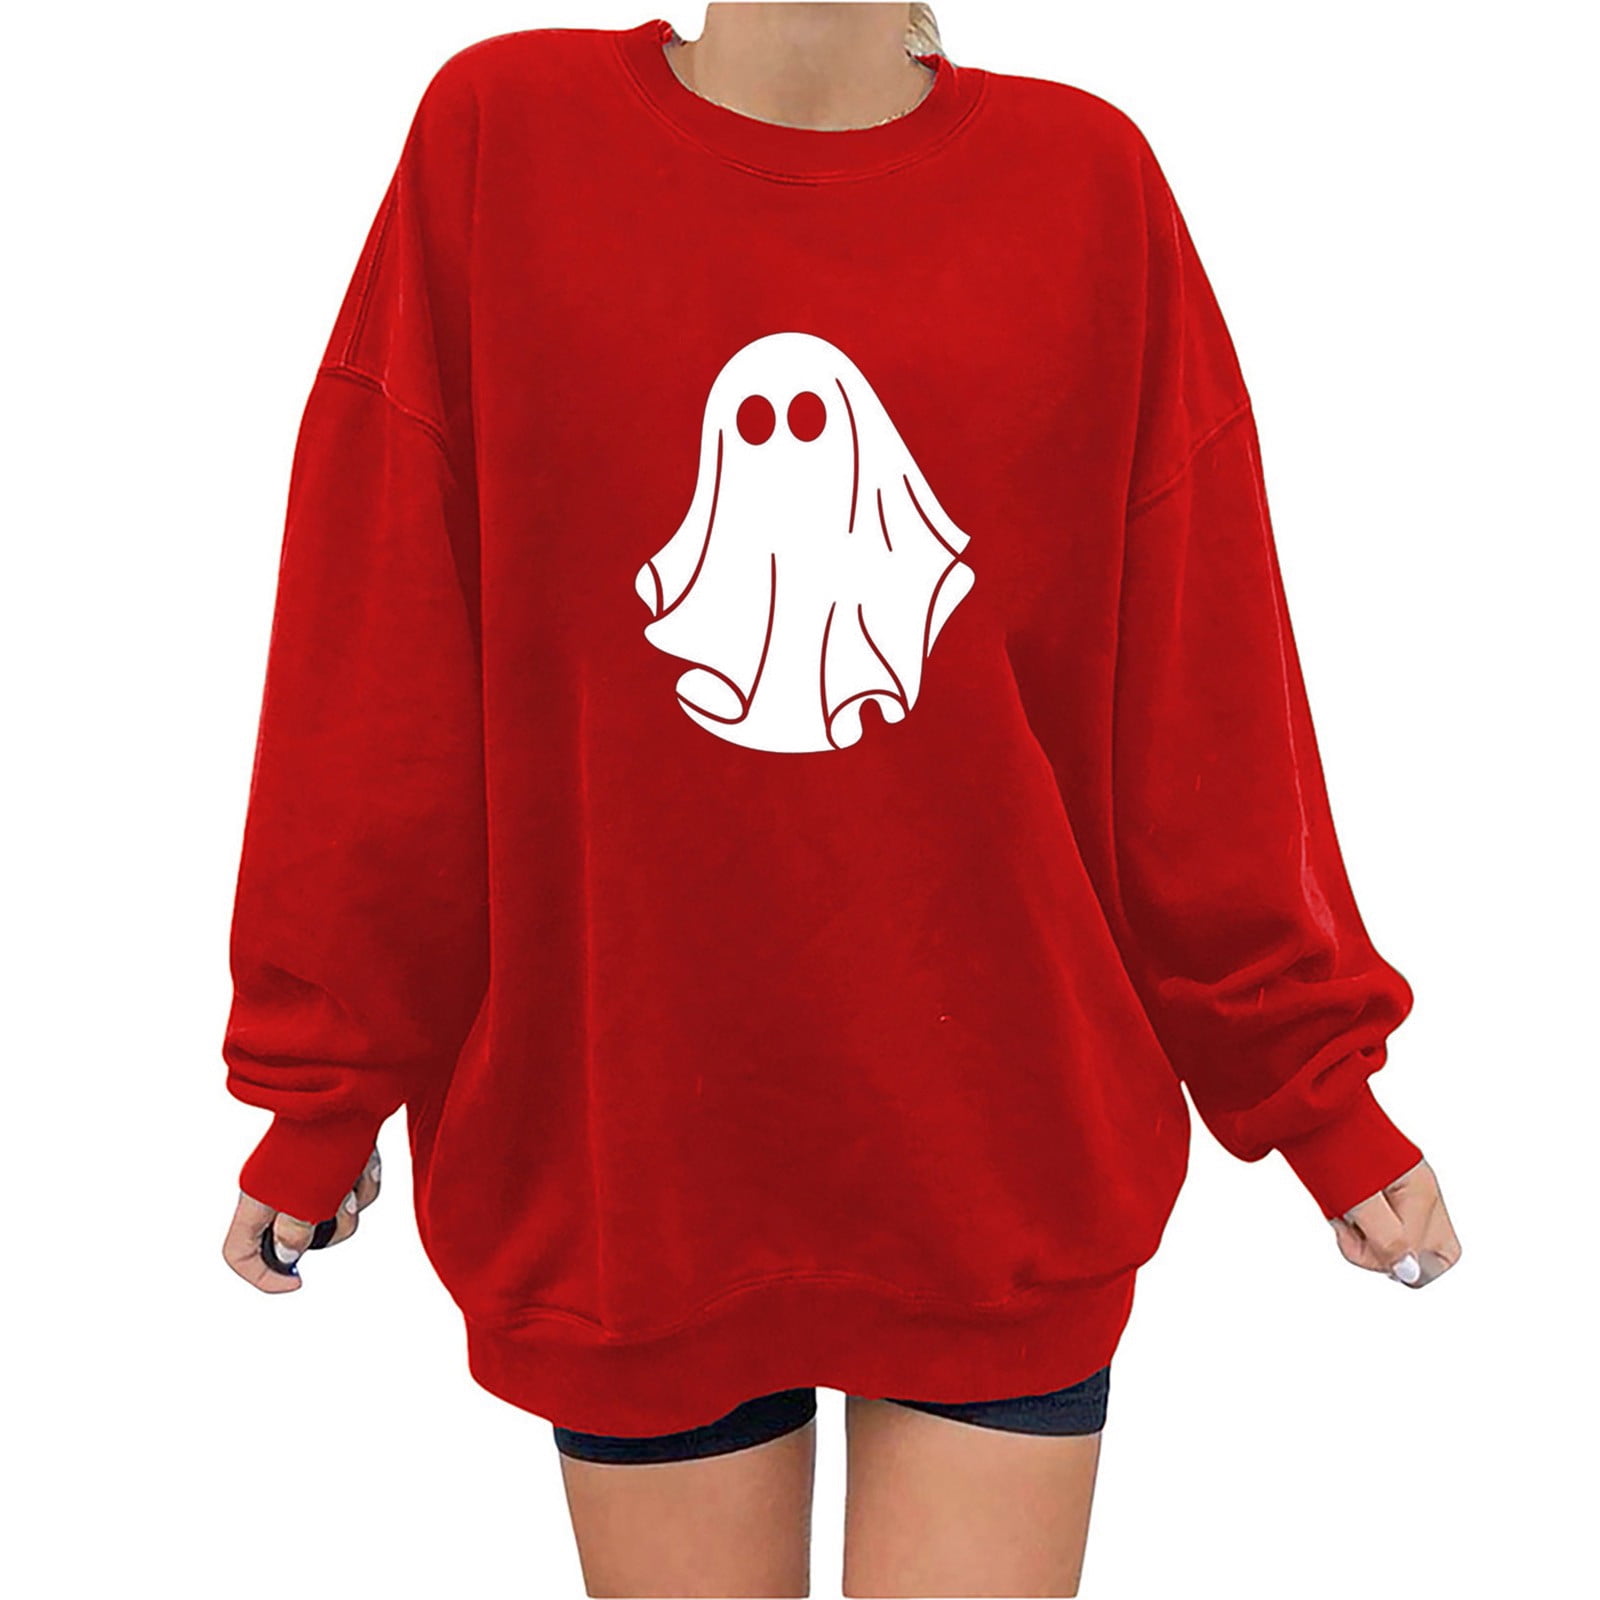  Halloween Oversized Sweatshirt for Women Fall Fashion Dressy  Long Sleeve Sweatshirts Hoodies Sweater Long Shirts To Wear with Leggings  Pullover Tops Autumn Trendy Vintage Blouses black Medium : Ropa, Zapatos y